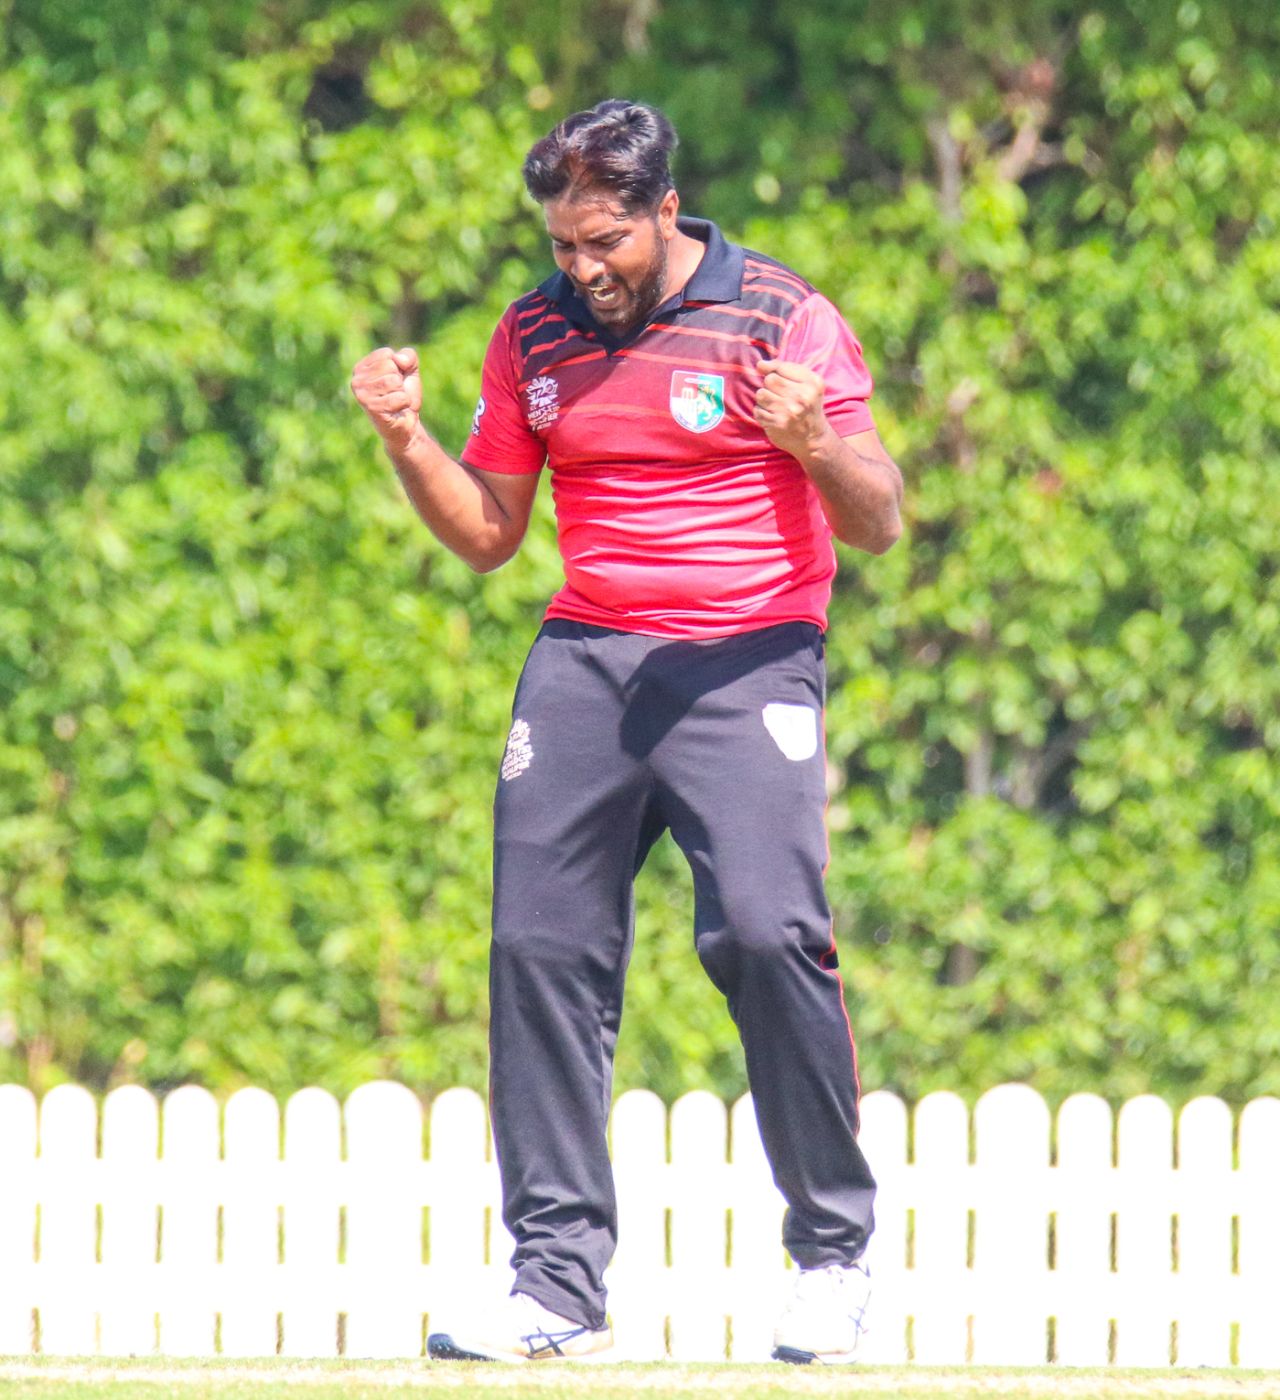 Singapore captain Amjad Mahboob howls in delight after taking a wicket at the death, Scotland v Singapore, T20 World Cup Qualifier, Dubai, October 18, 2019 